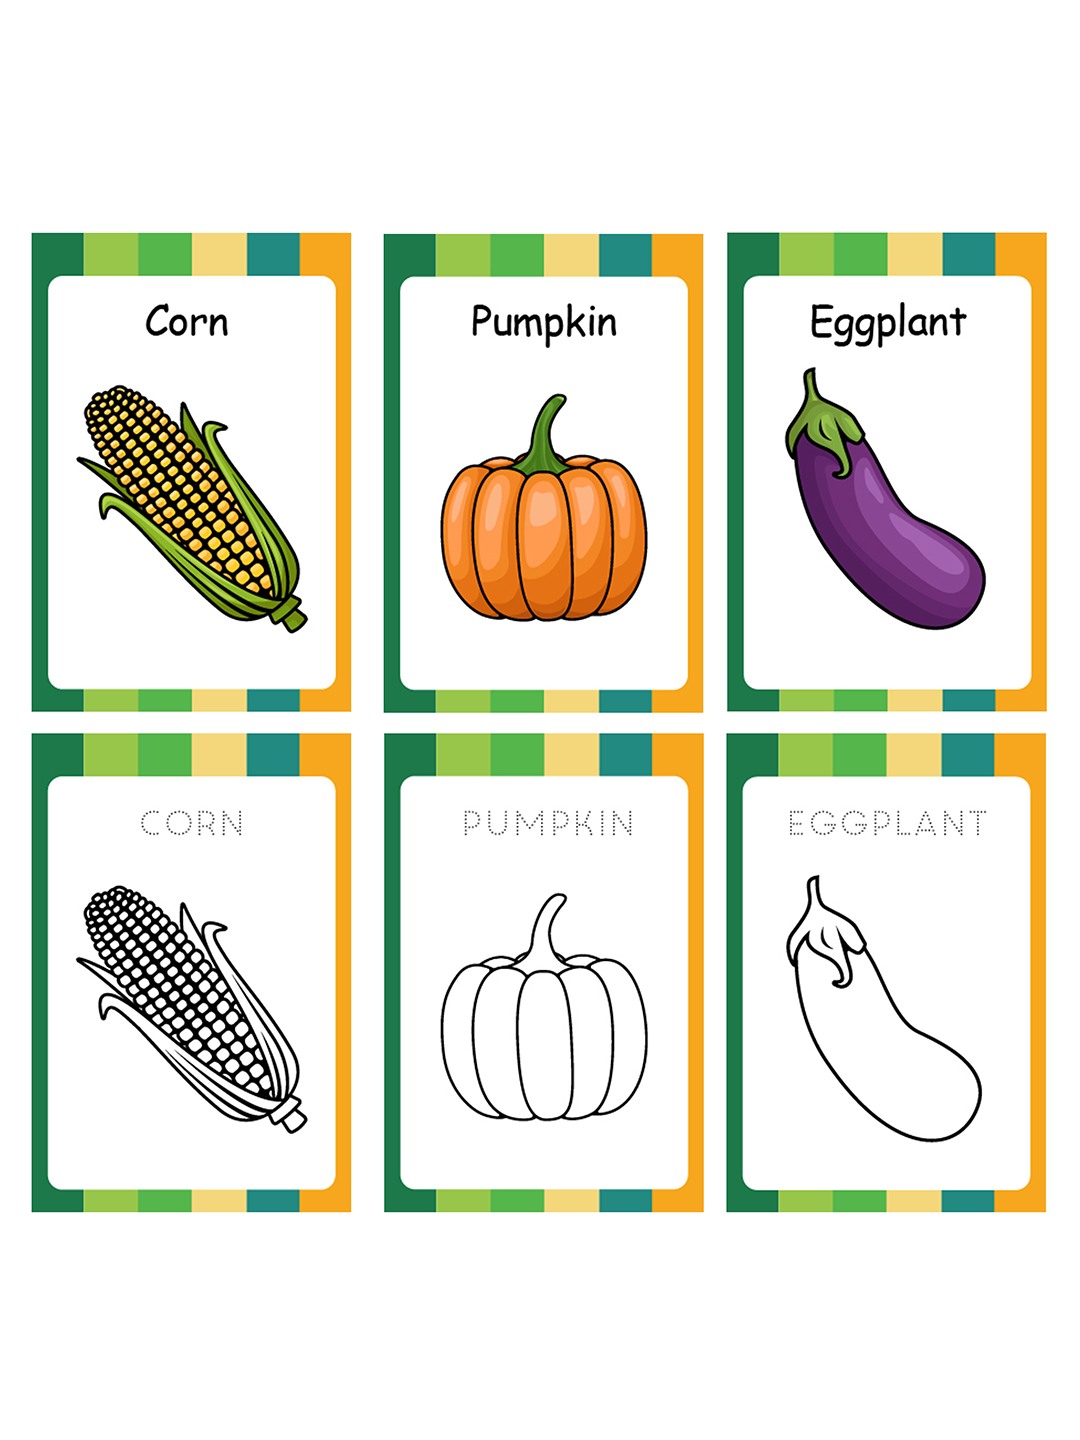 Baby's First Vegetables Flash Cards